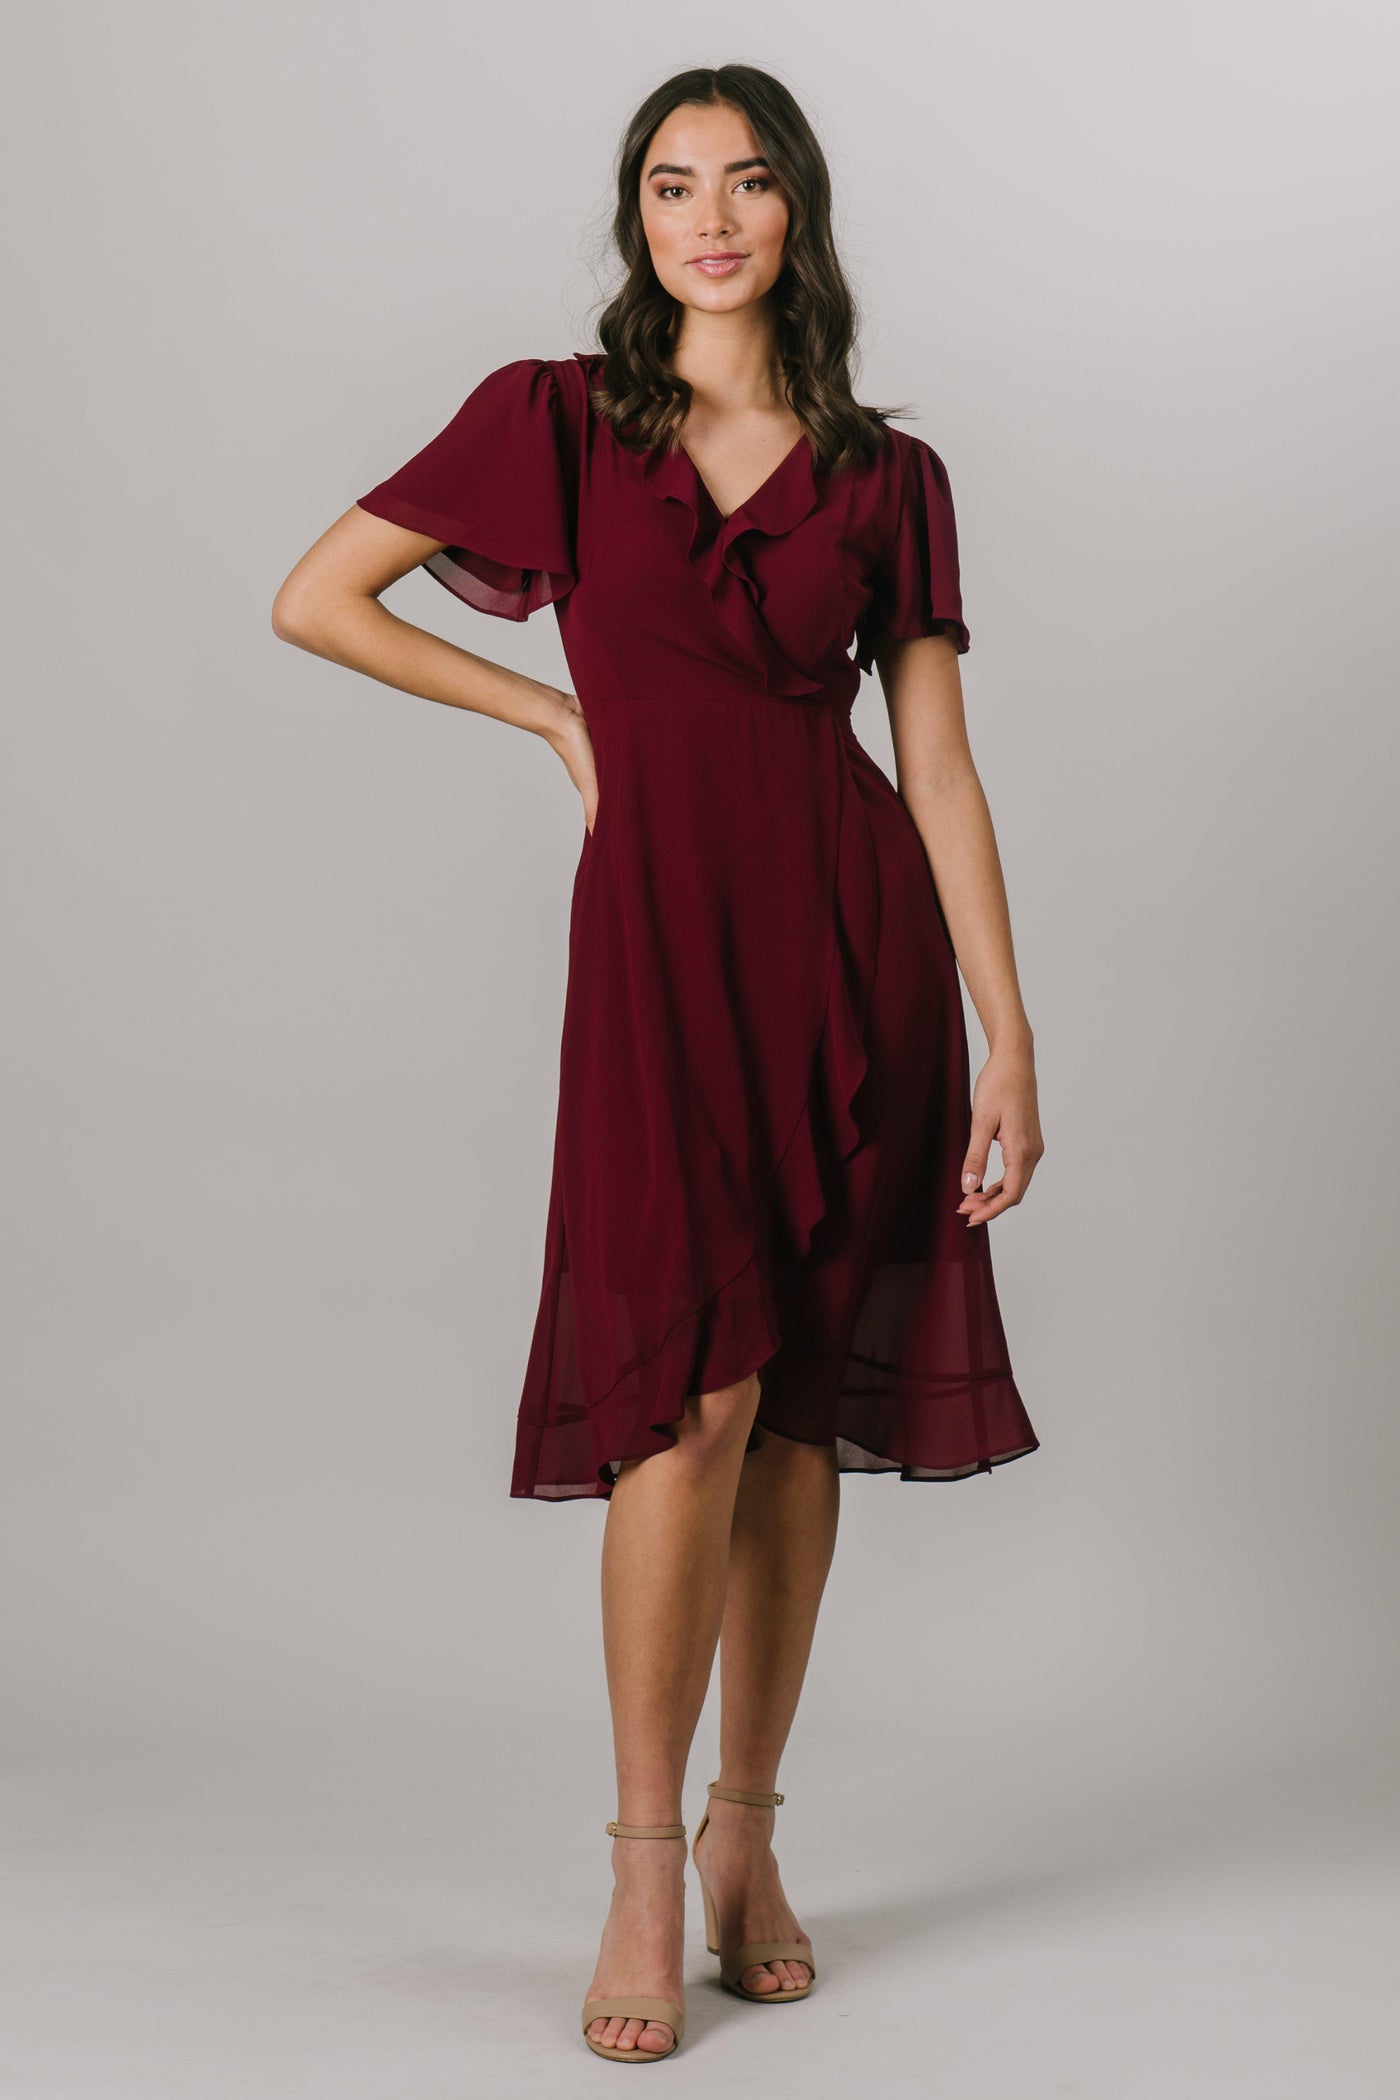 This fun modest dress is perfect for your everyday moments! It features a flattering fit and ruffles following the wrap shape! The sleeves also add a touch of fun!  Also available in Navy. Modest Dresses - Modest Clothing - Everyday Modest Dresses - Bridesmaid Modest Dresses. 